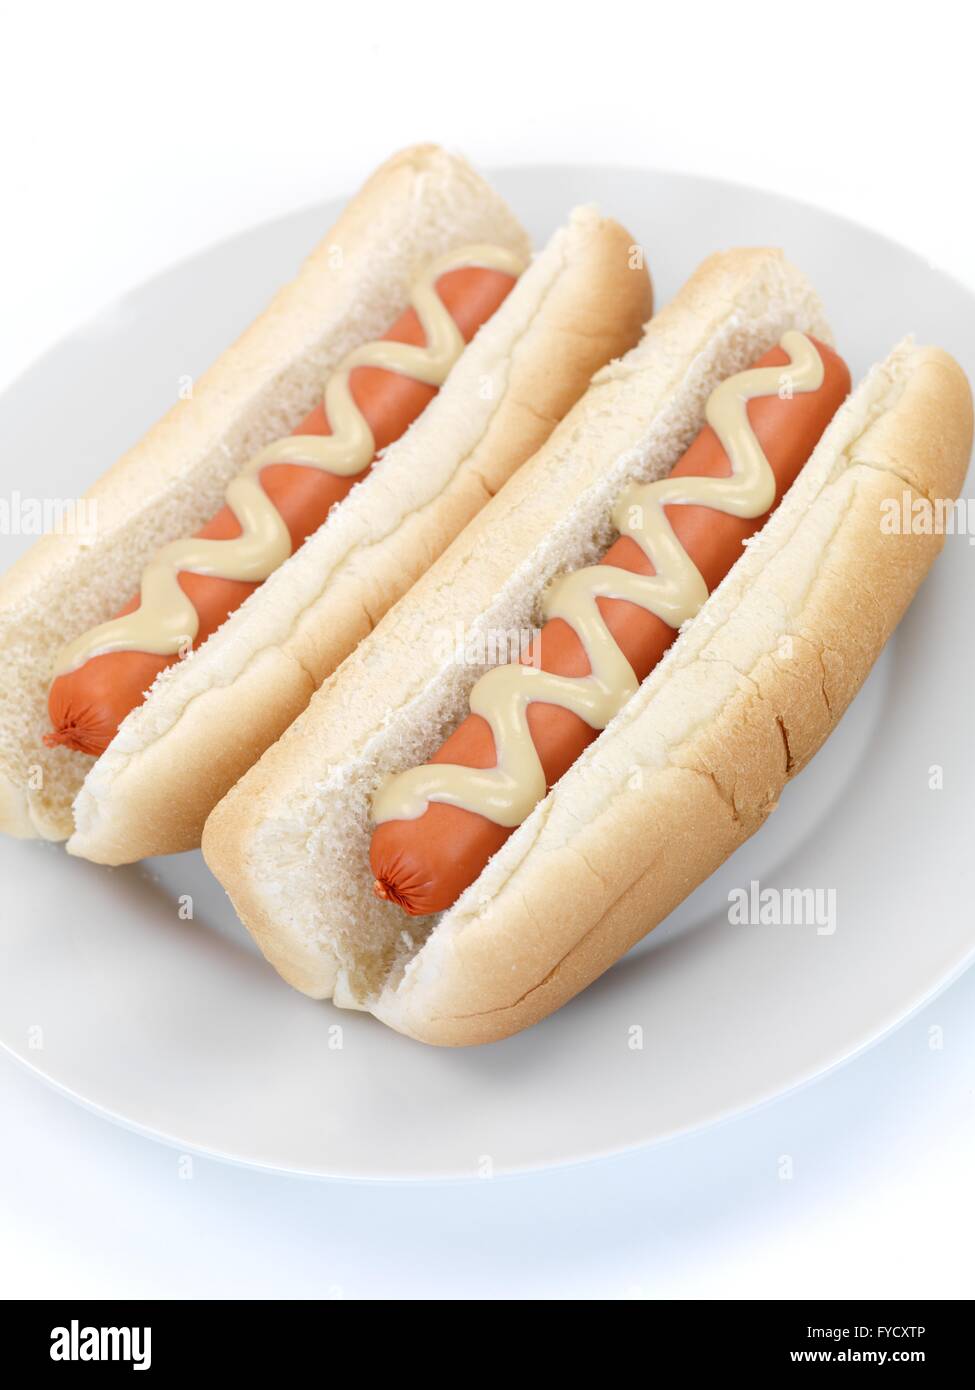 A hotdog with mustard sauce on a kitchen bench Stock Photo